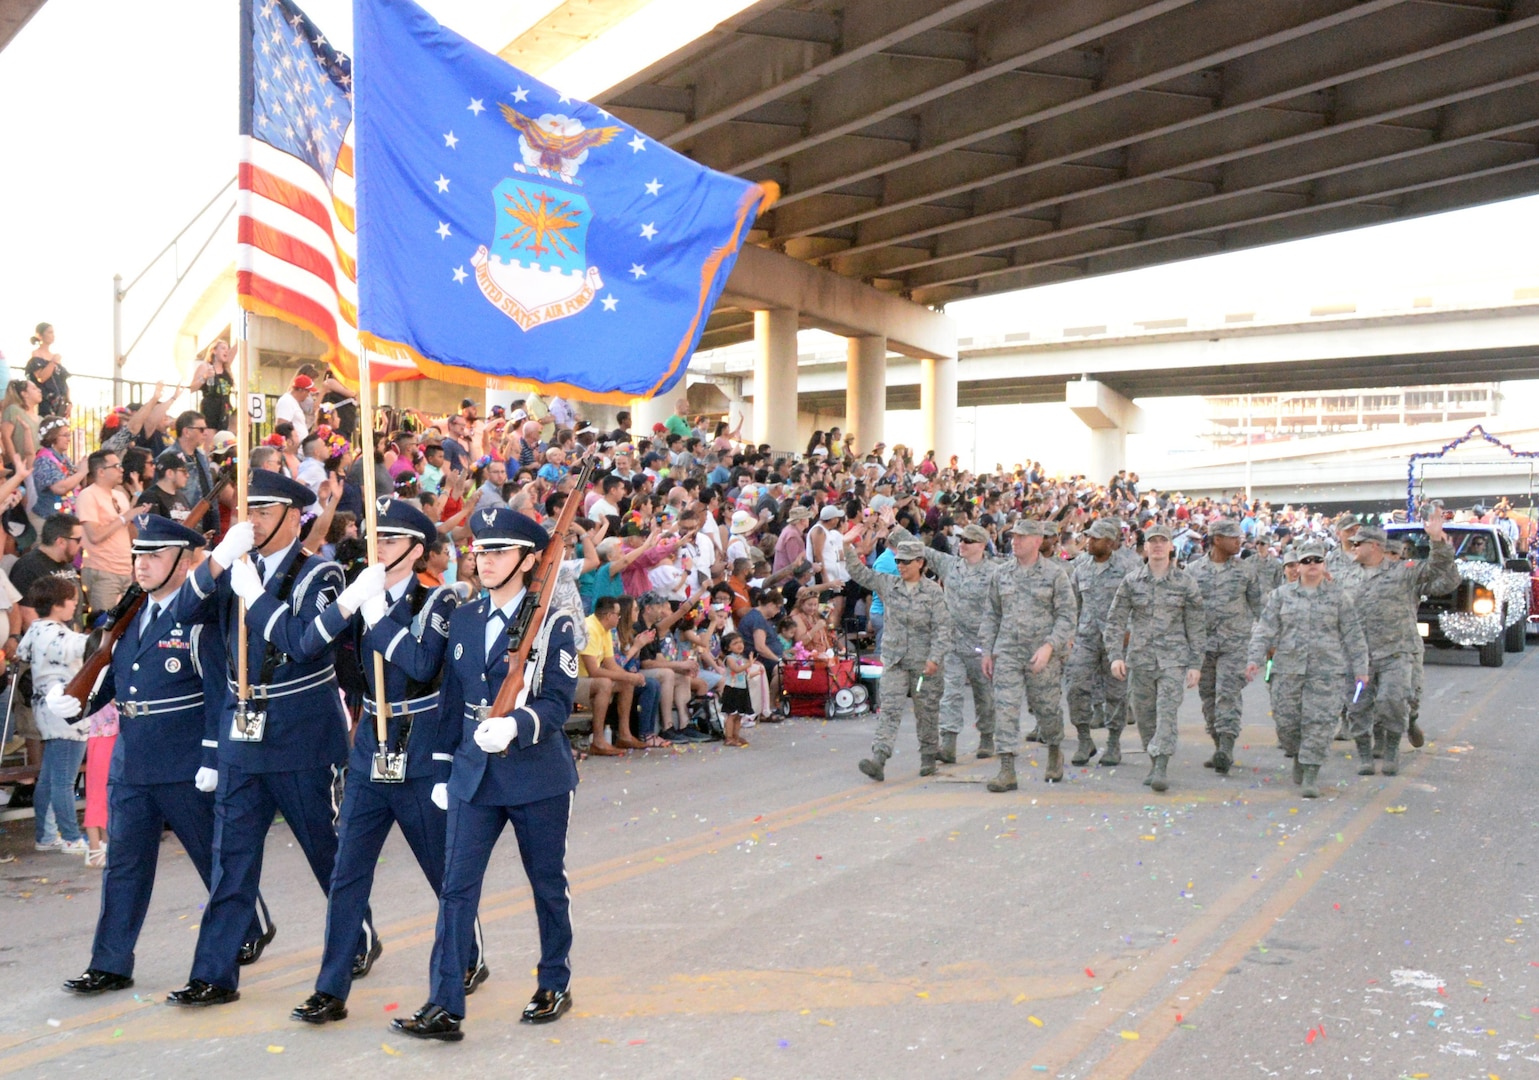 The 433rd Airlift Wing's Honor Guard leads the 433rd Airlift Wing and 960th Cyberspace Wing walkers and float on Broadway Street in downtown San Antonio during the 71st annual Fiesta Flambeau Parade April 27. More than 750,000 spectators lined the 2.6-mile-long route see more than 200 floats and marching bands perform in the grand finale of Fiesta Week.